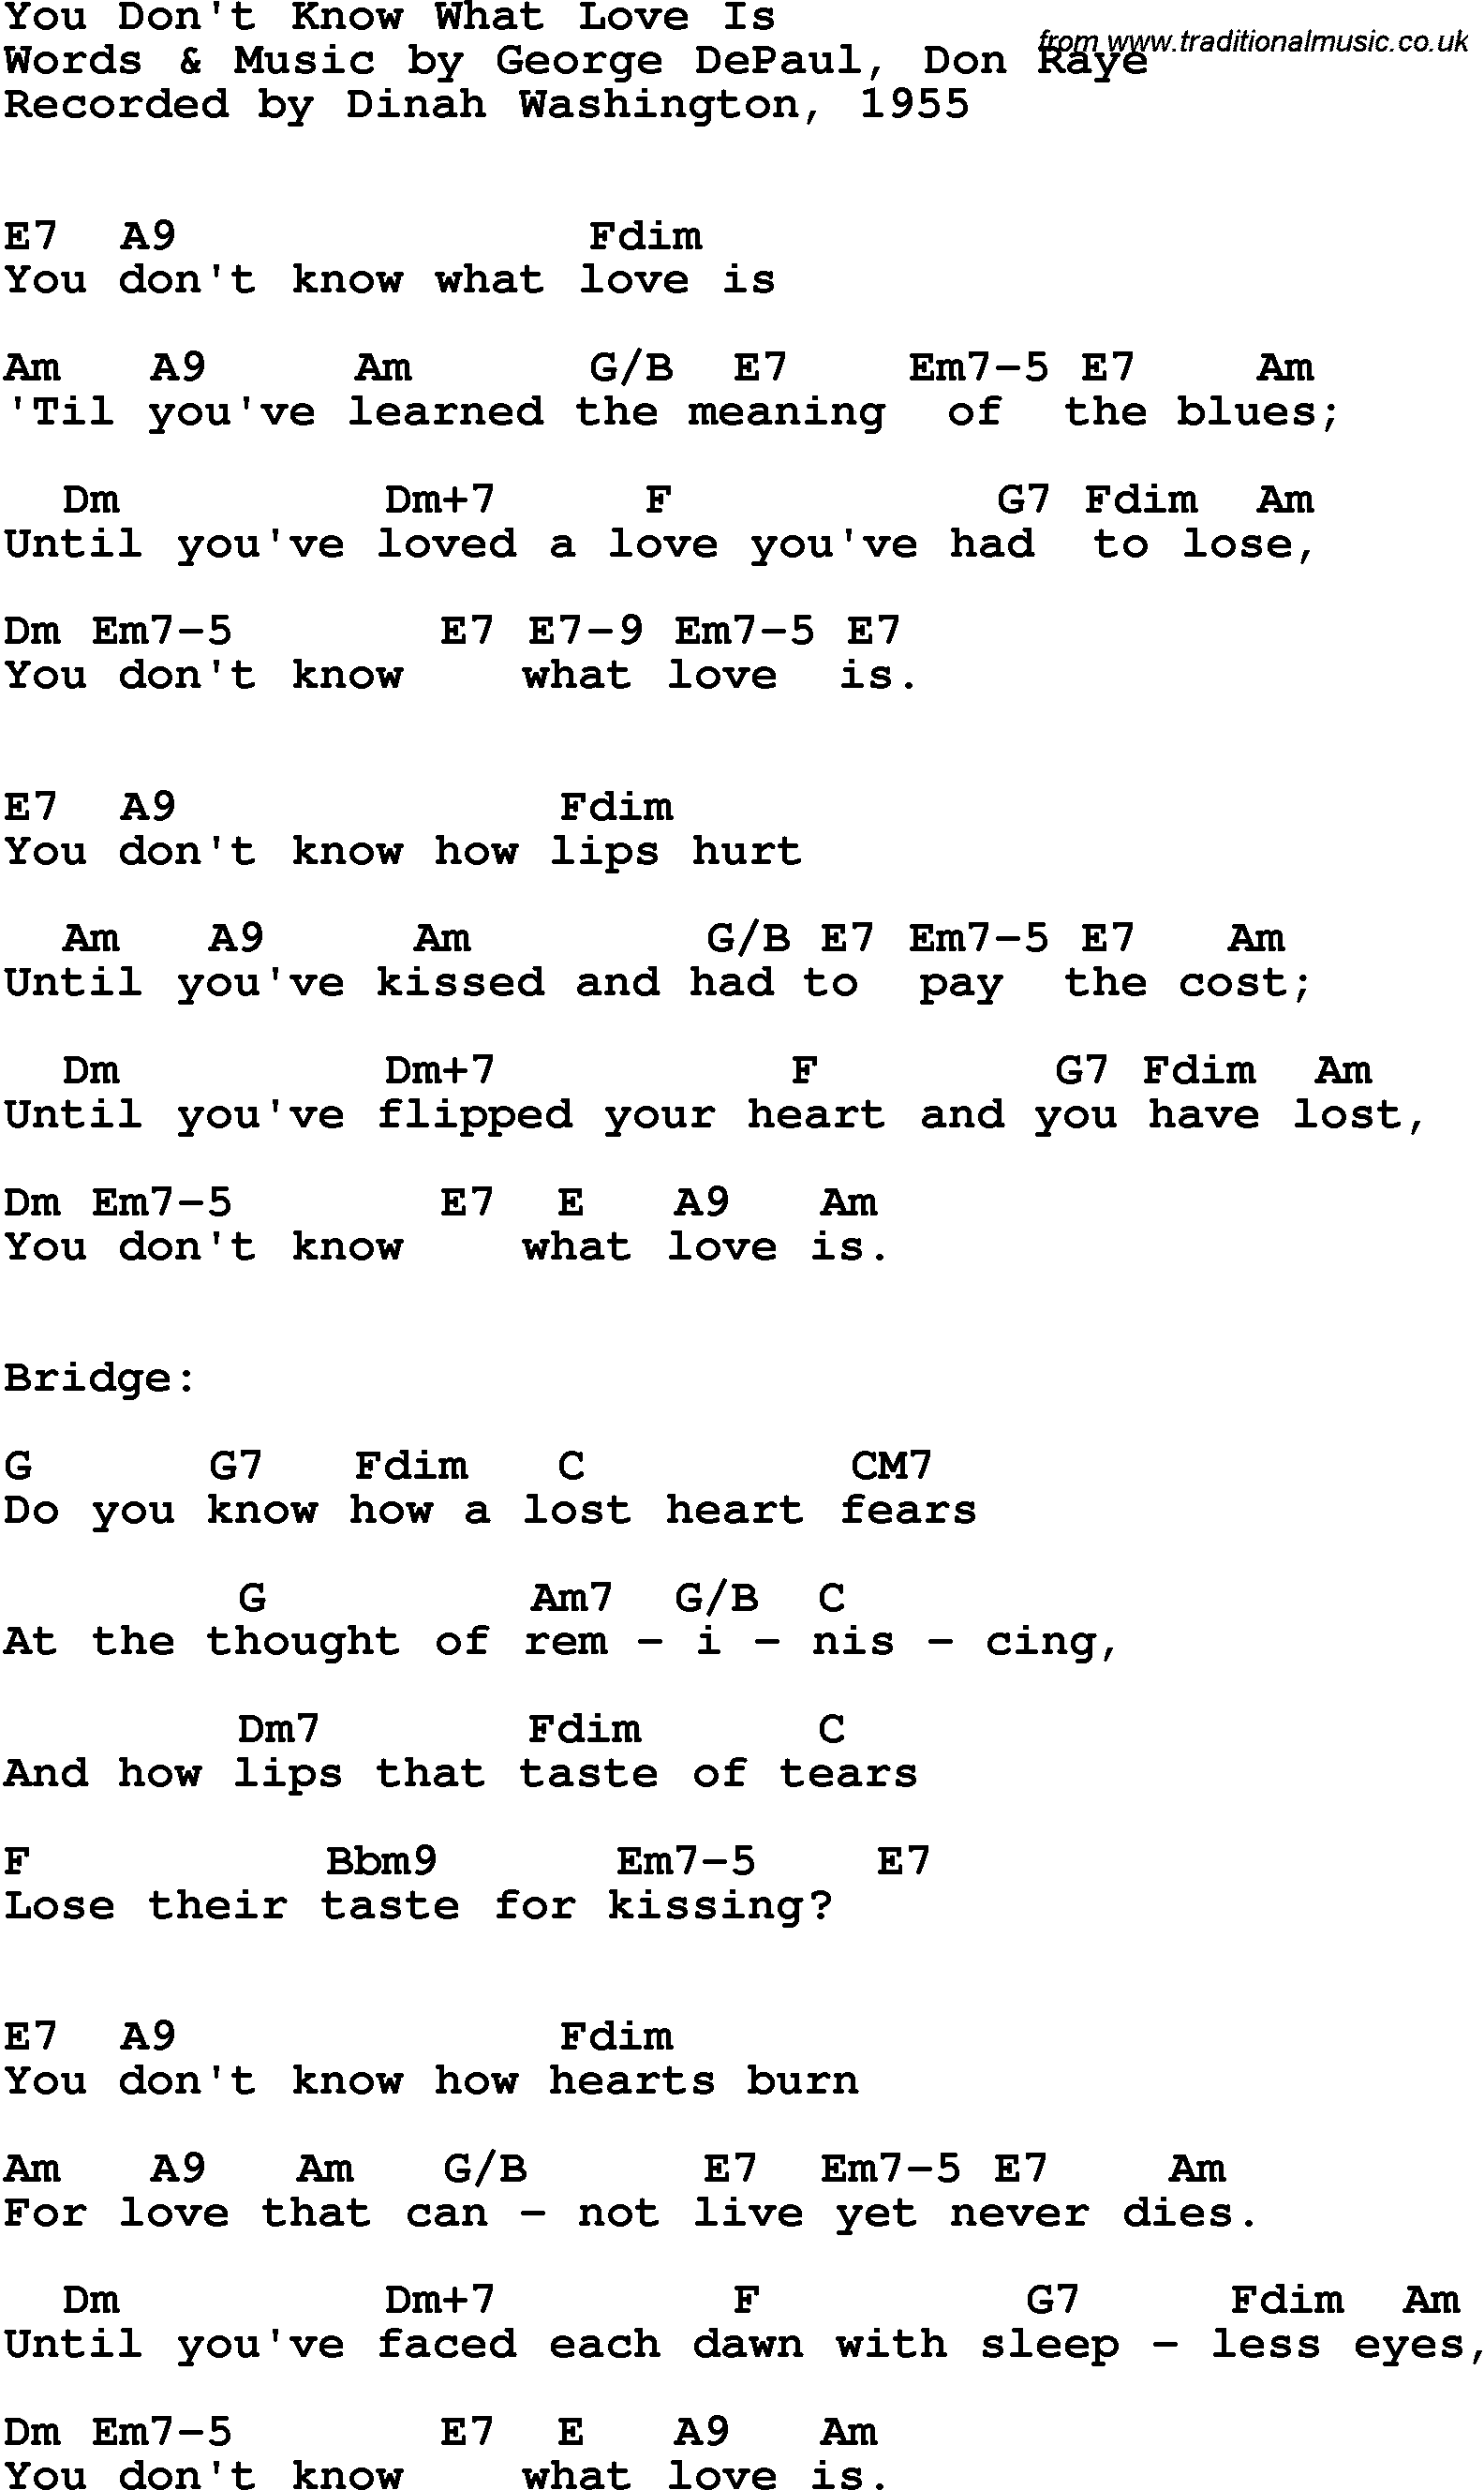 Song Lyrics with guitar chords for You Don't Know What Love Is - Dinah Washington, 1955